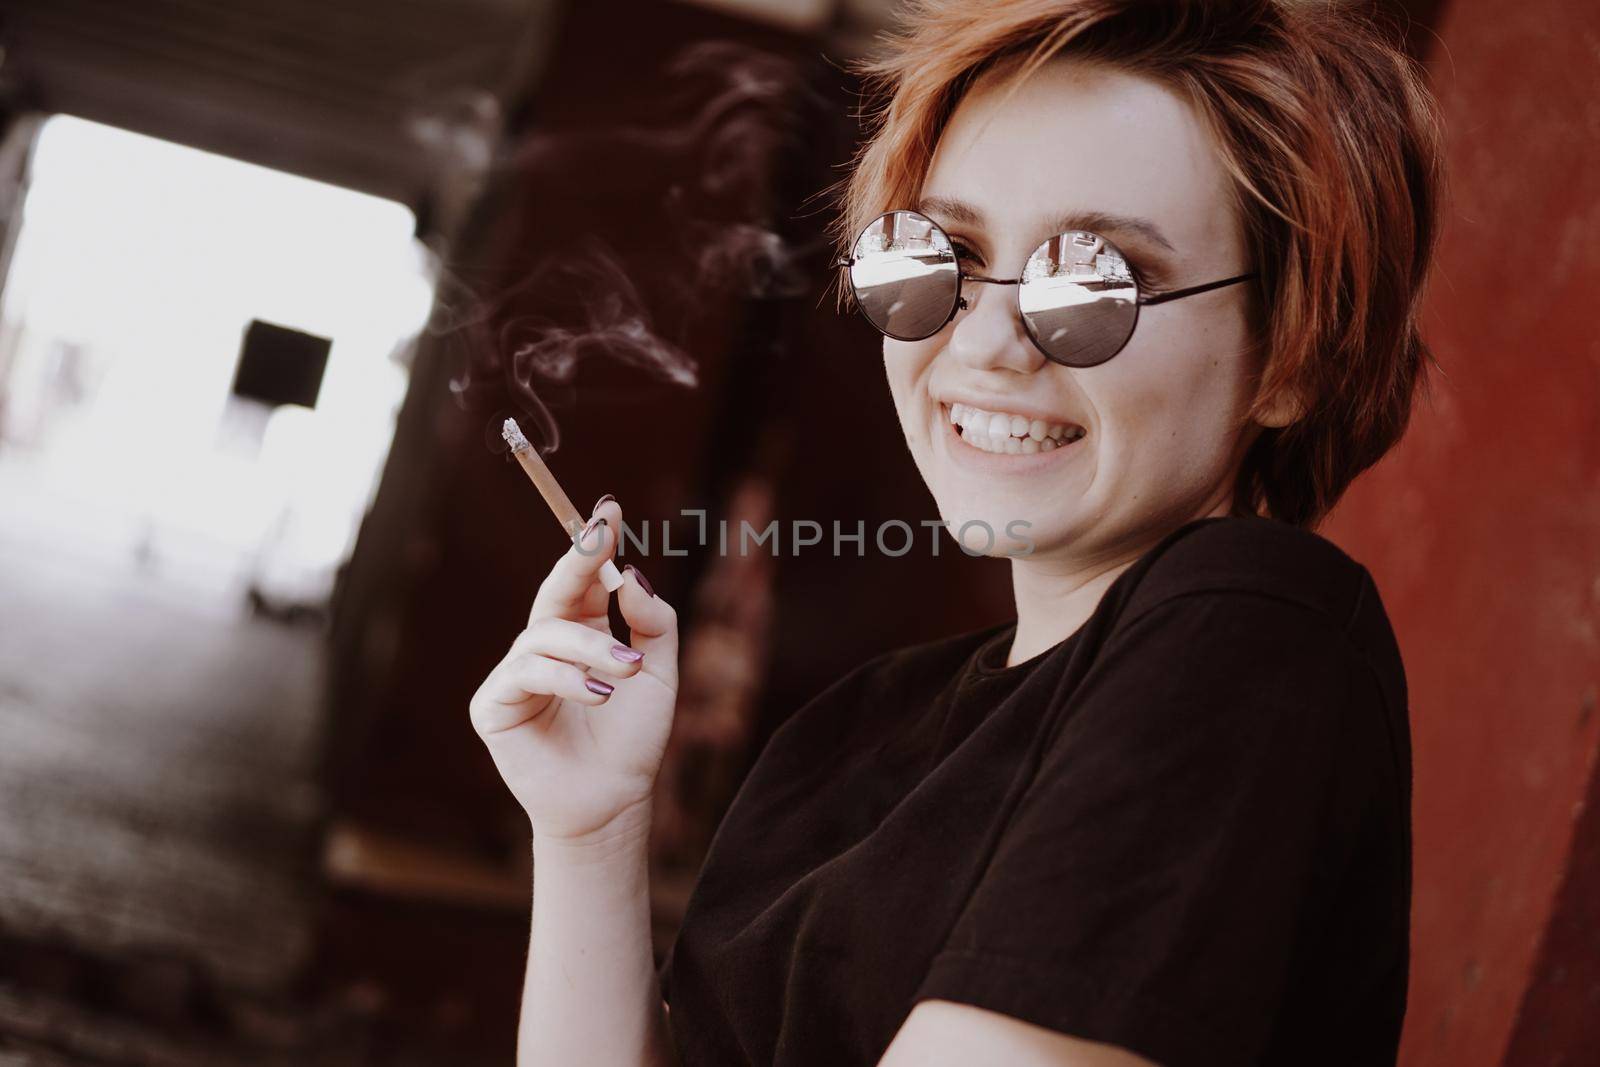 Millennial cool pretty girl with short red hair and mirror sunglasses smoking cigarette in the old city with red walls. Smiling happy teen girl